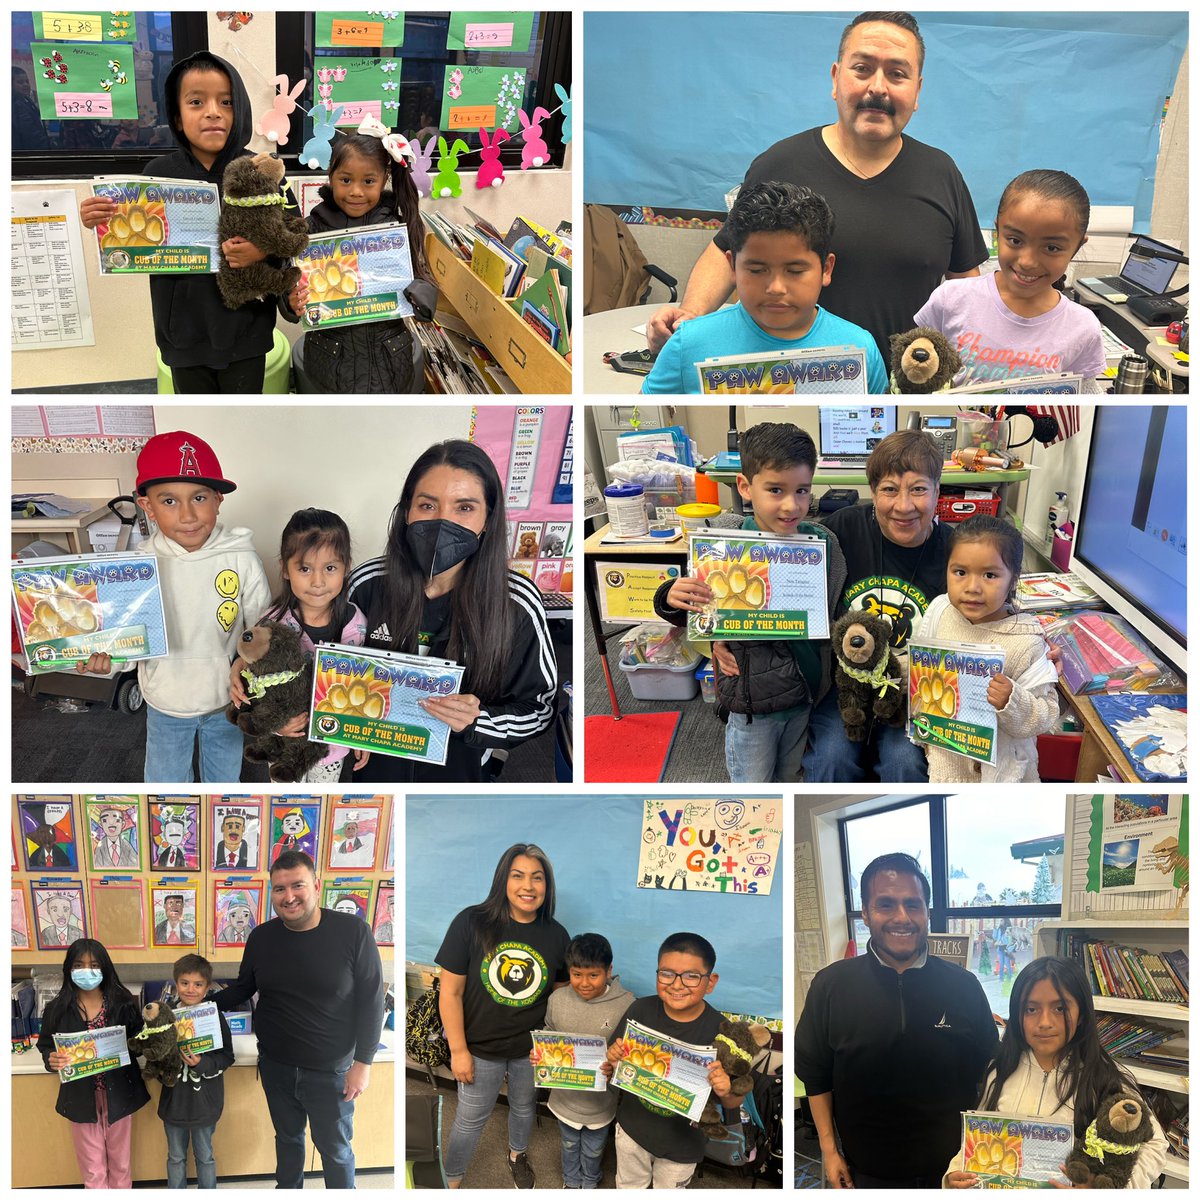 Sharing some of our Cubs of the Month. They were recognized for showing perseverance. We are so very proud of our Kodiaks. 

💚🐻💪🏽
@zjgalvan @AracelyZavala19 @ms_pantaleon 
#ProudtobeGUSD #GreenfieldGuarantee #CharacterCounts